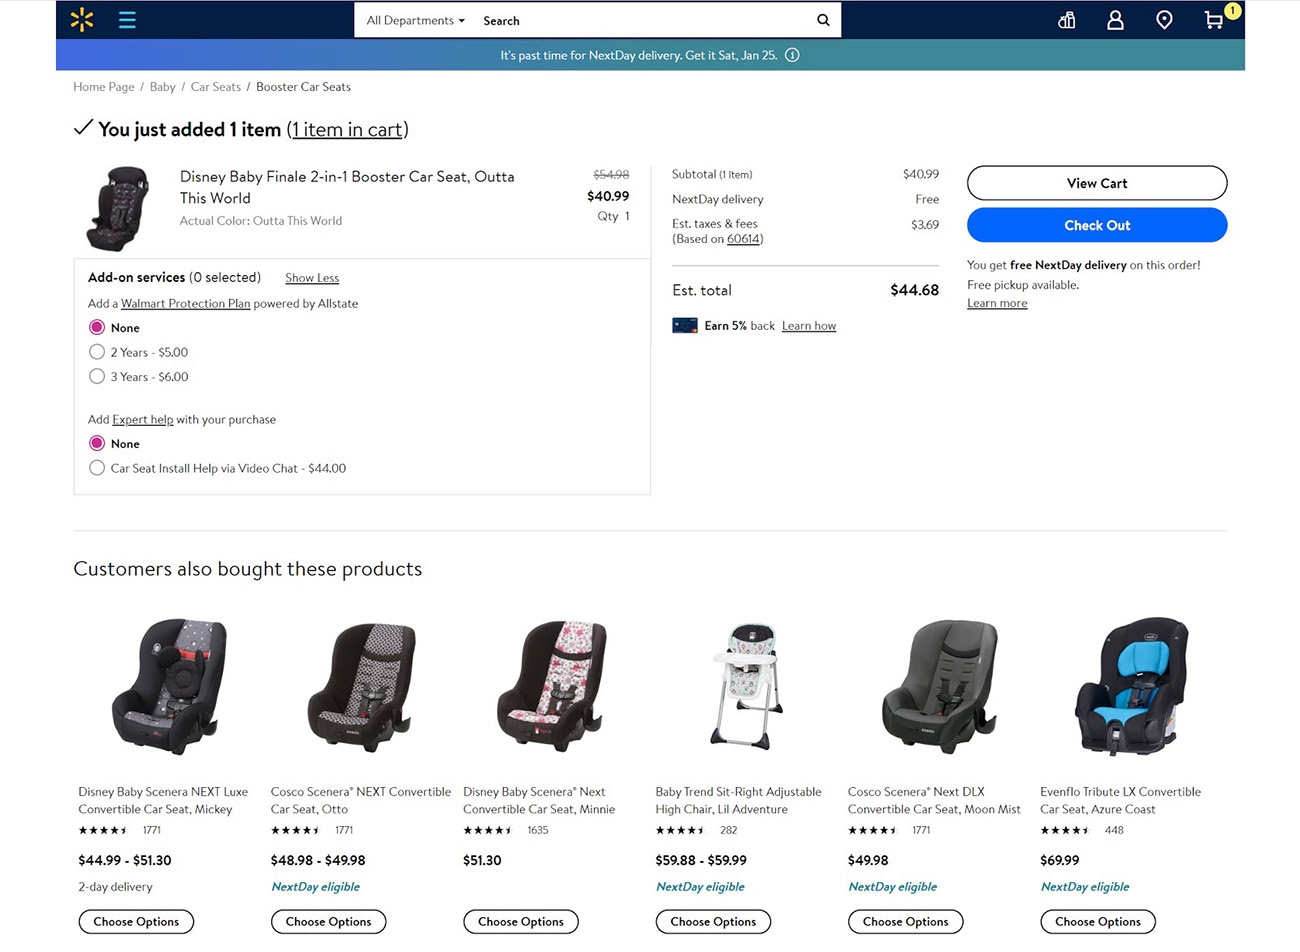 Example of recommended baby car seats on the Walmart website